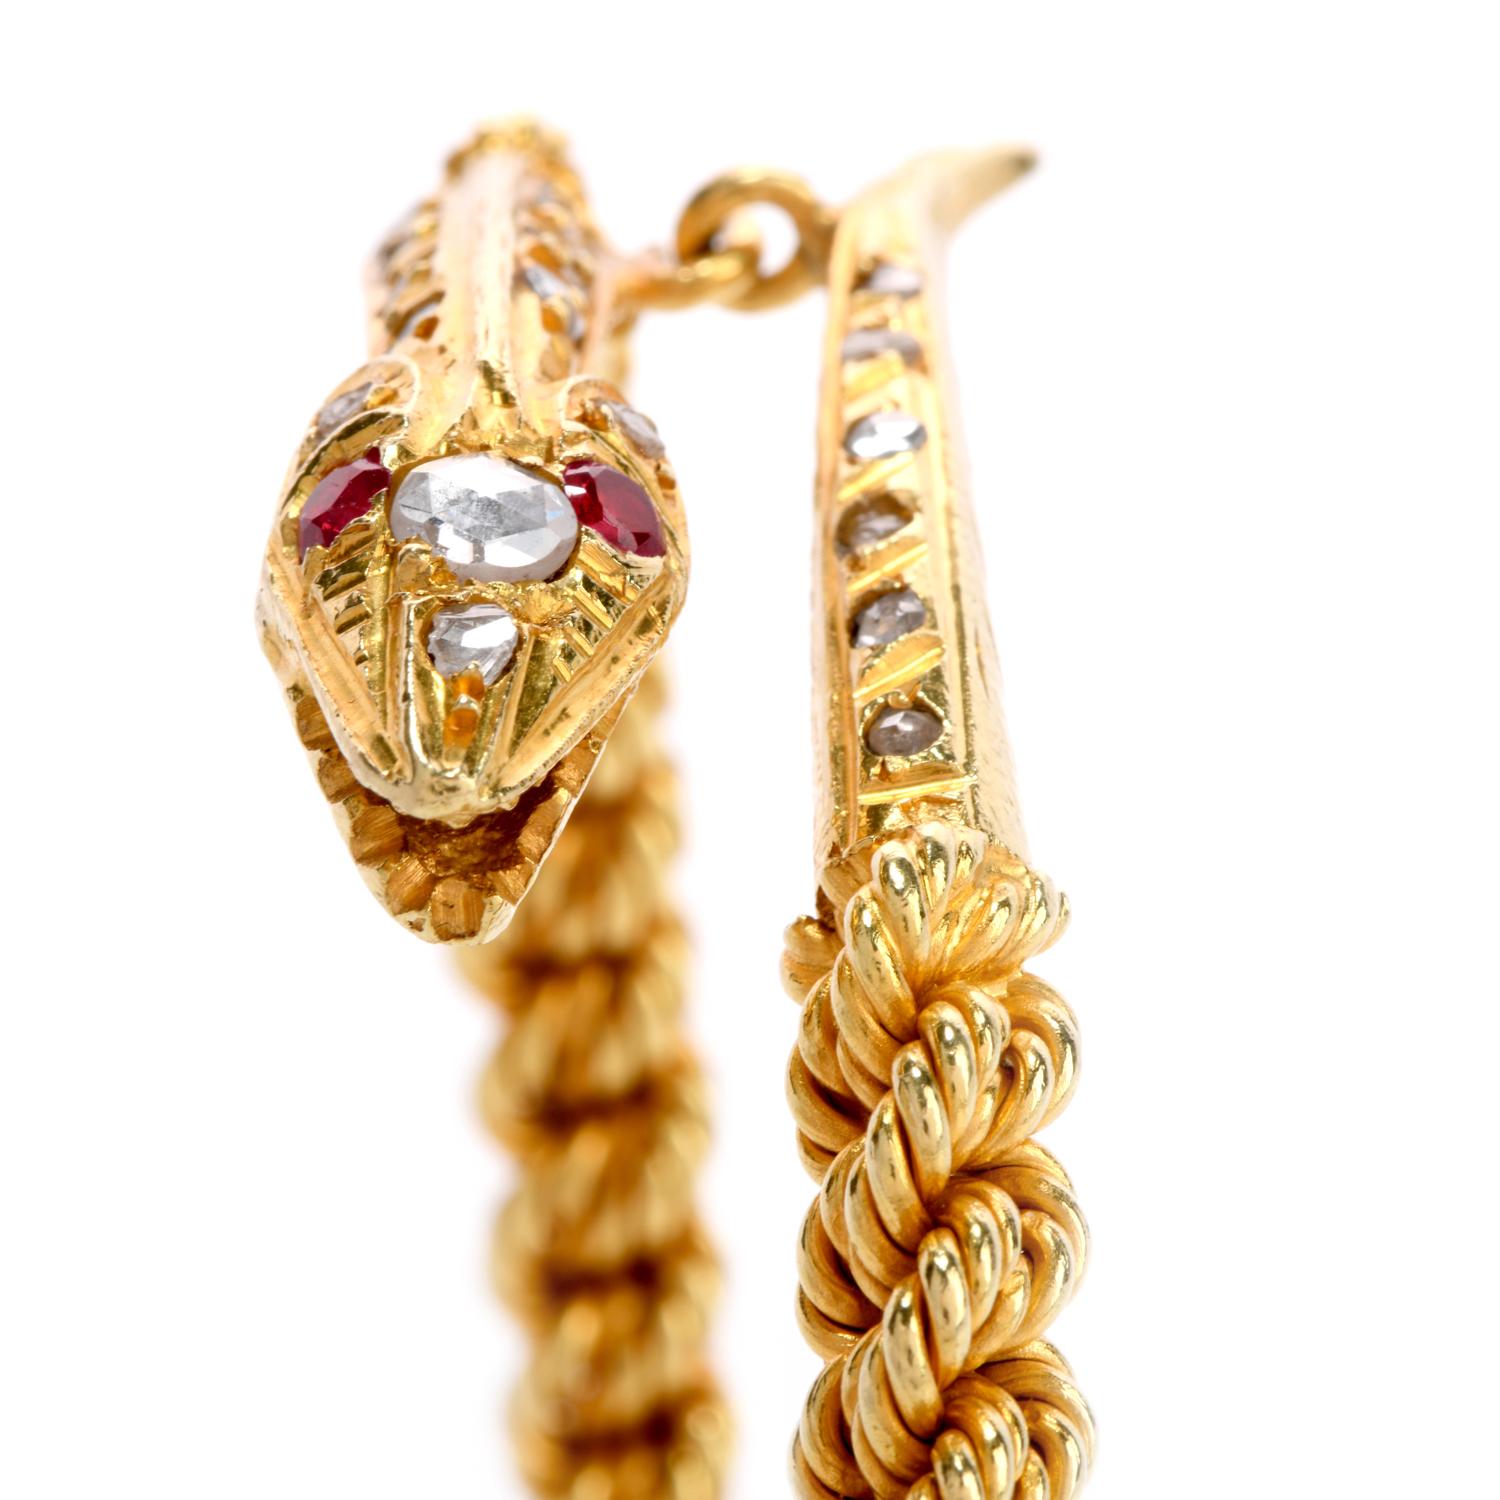 This Over-sized Vintage snake bangle bracelet made in 18k yellow gold.
Its sculpted body wraps around the your wrist.
The snake body is made of hand twisted18k yellow gold  wire like a rope with solid gold head and tail set with antique rose- cut